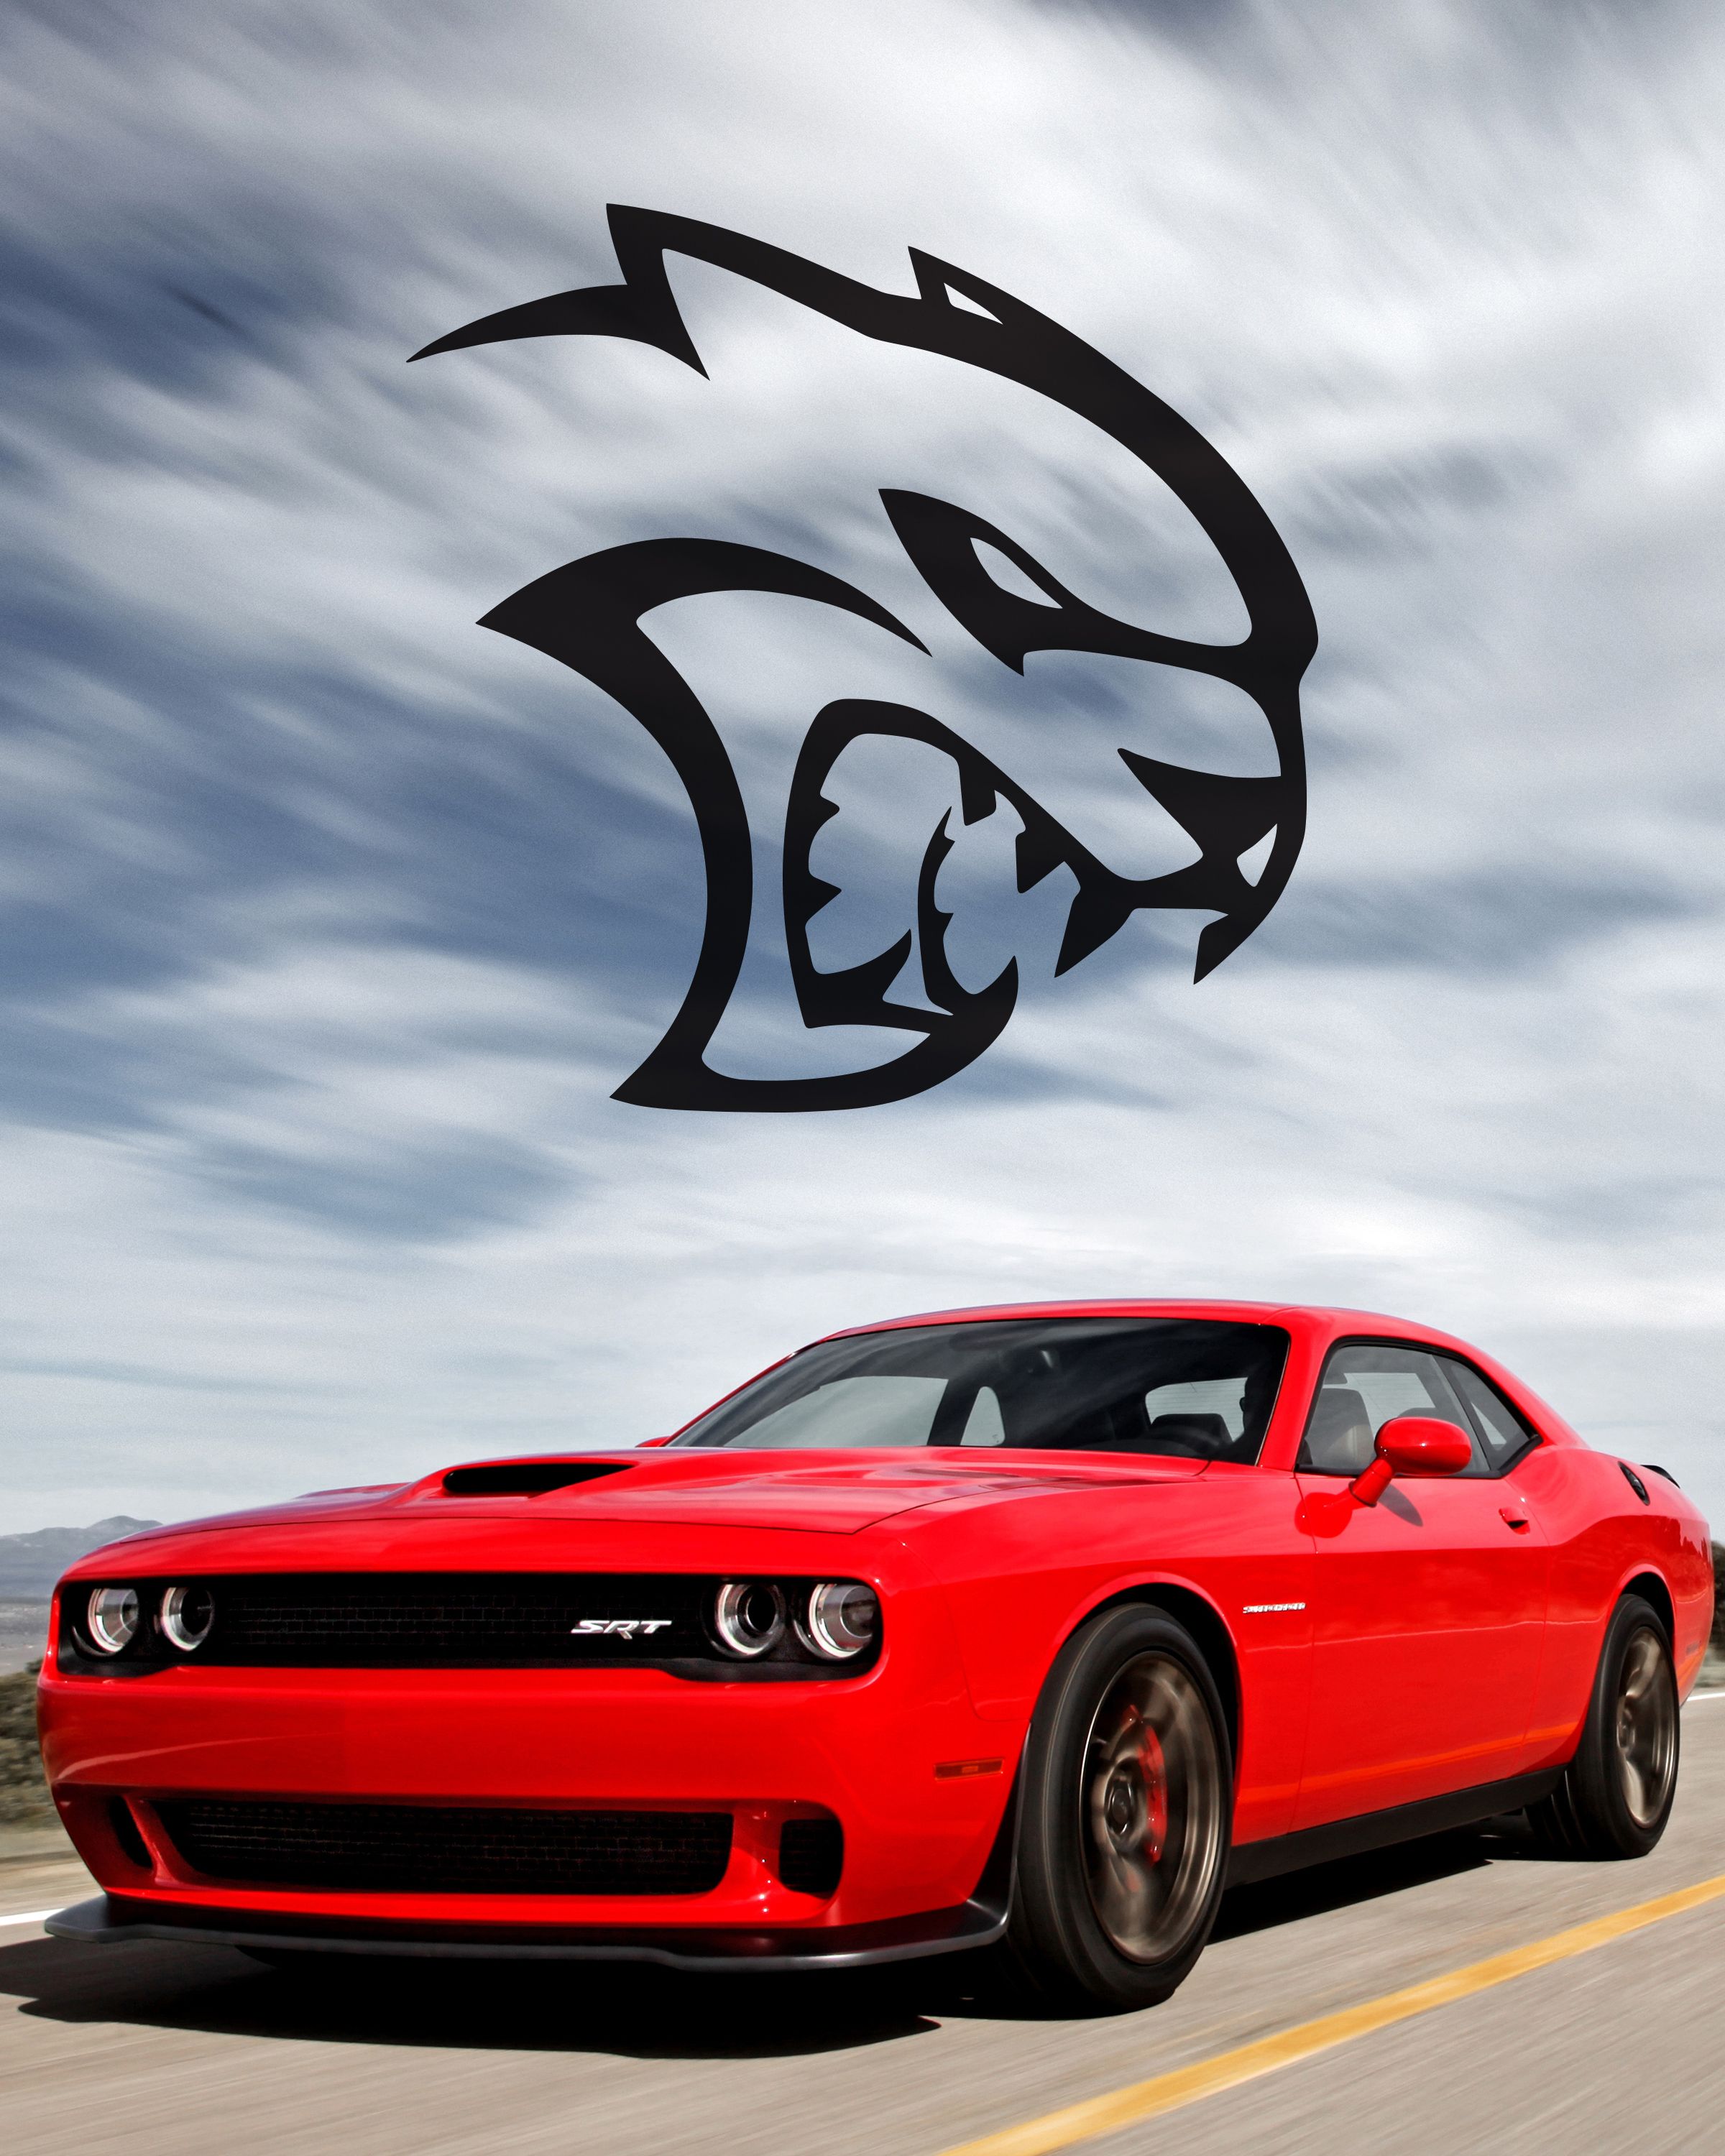 Dodge Charger Hellcat Wallpaper On